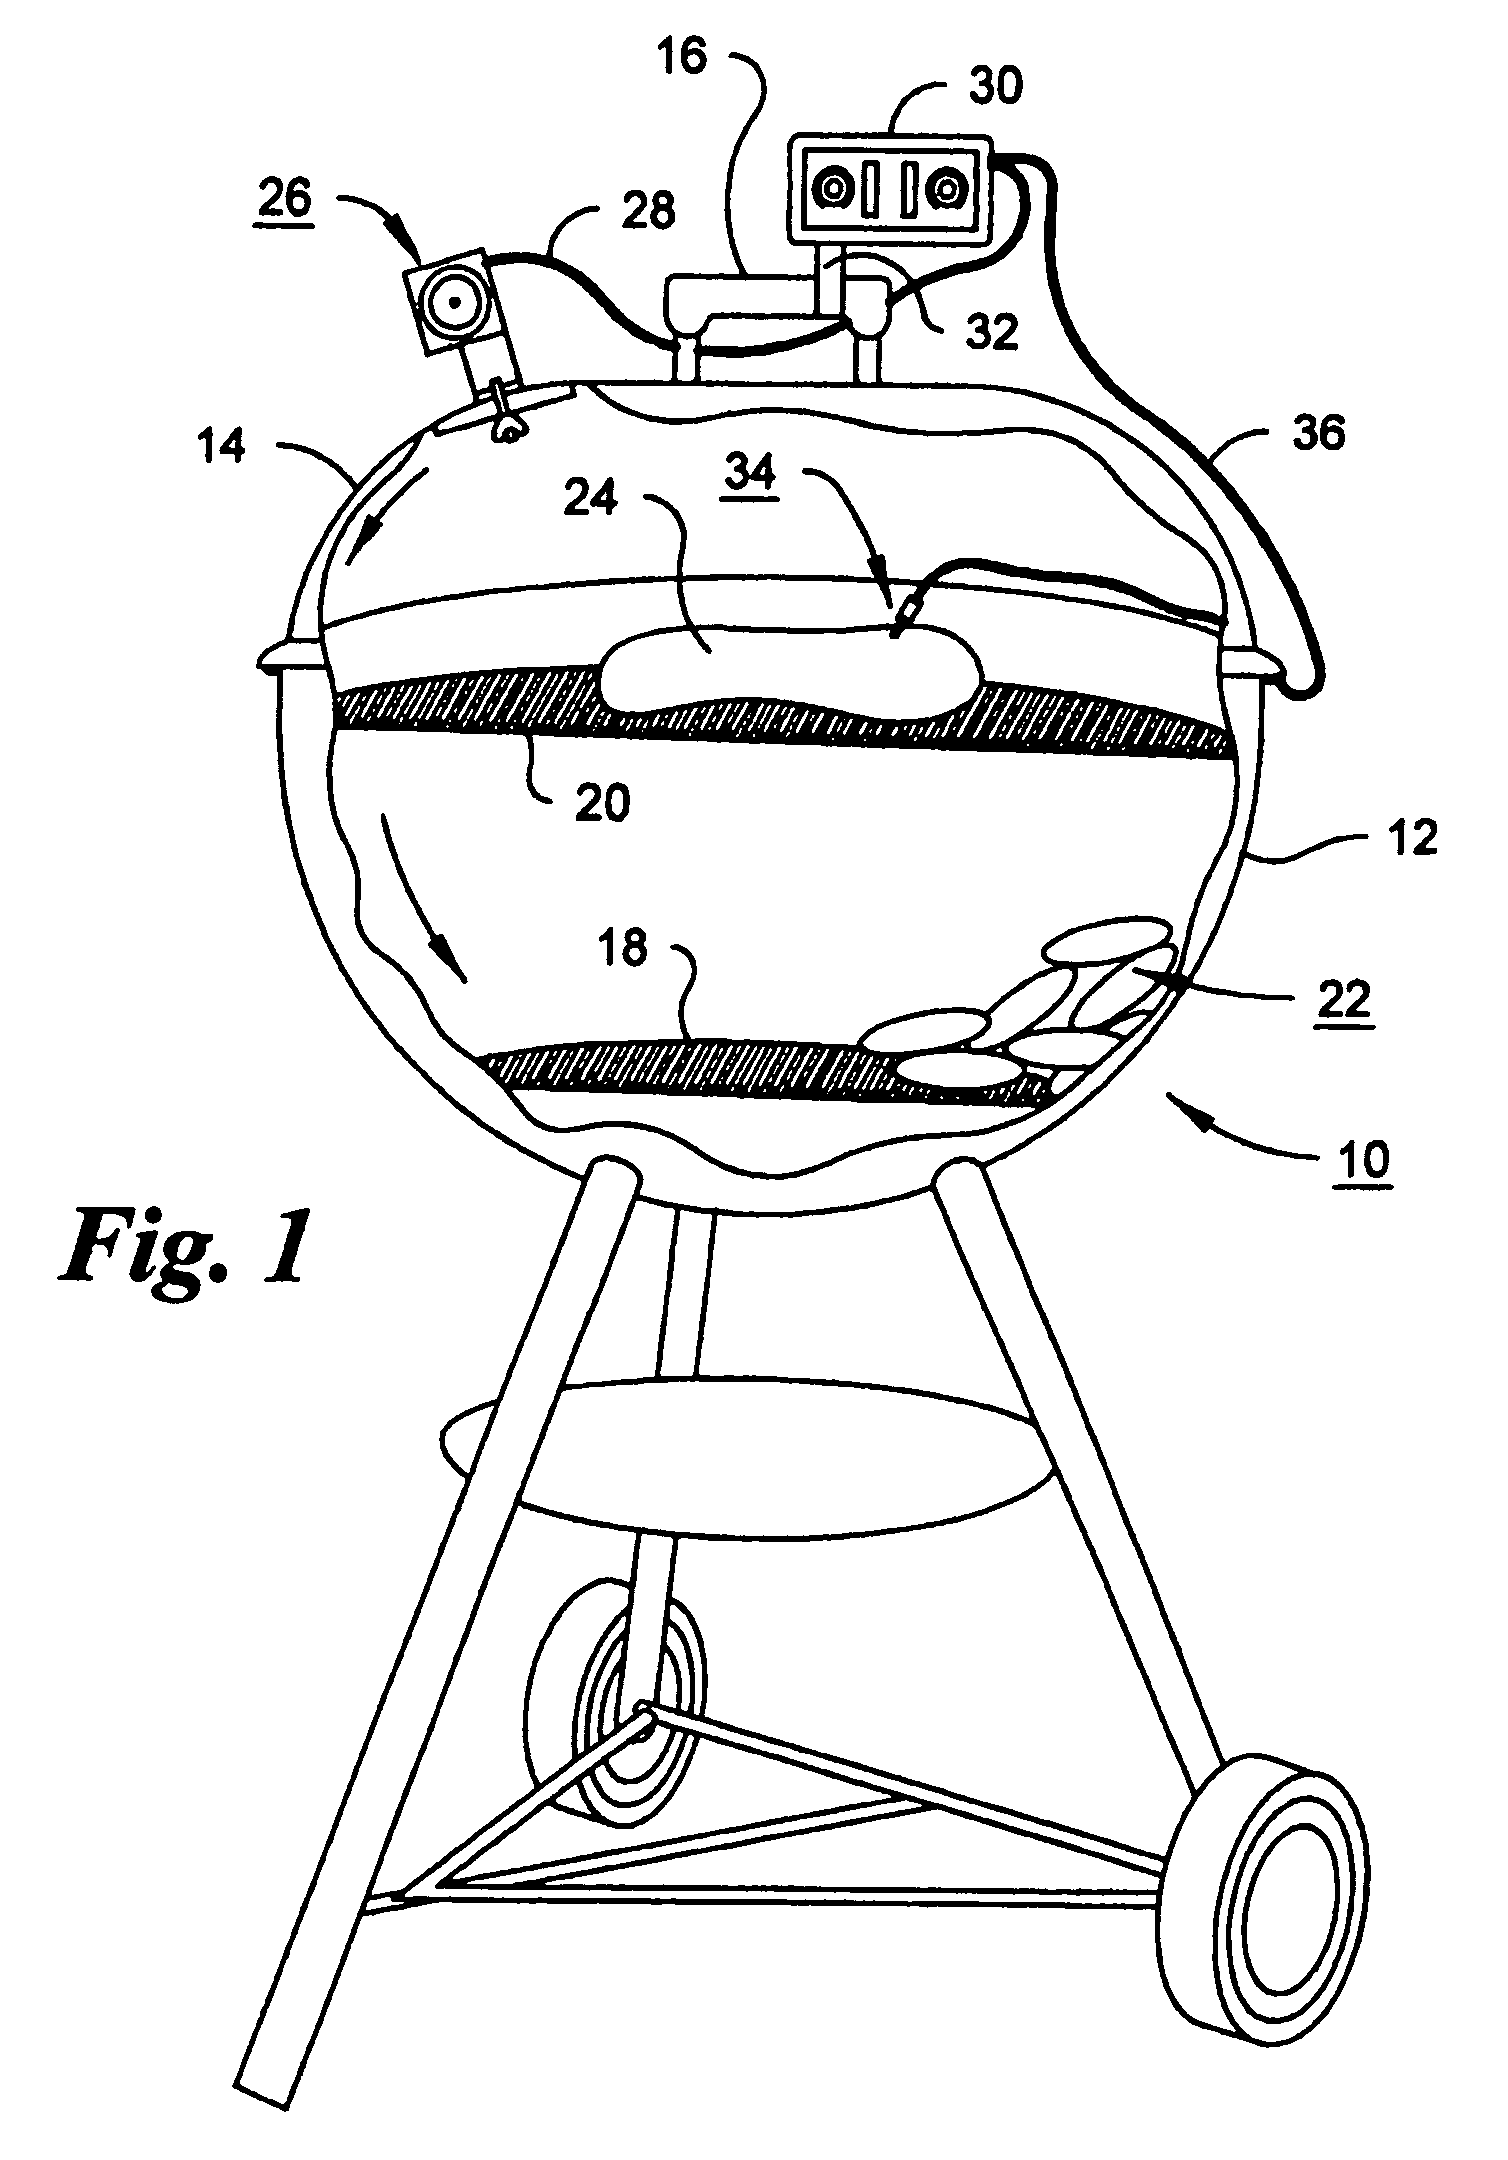 Method and apparatus for slow cooking